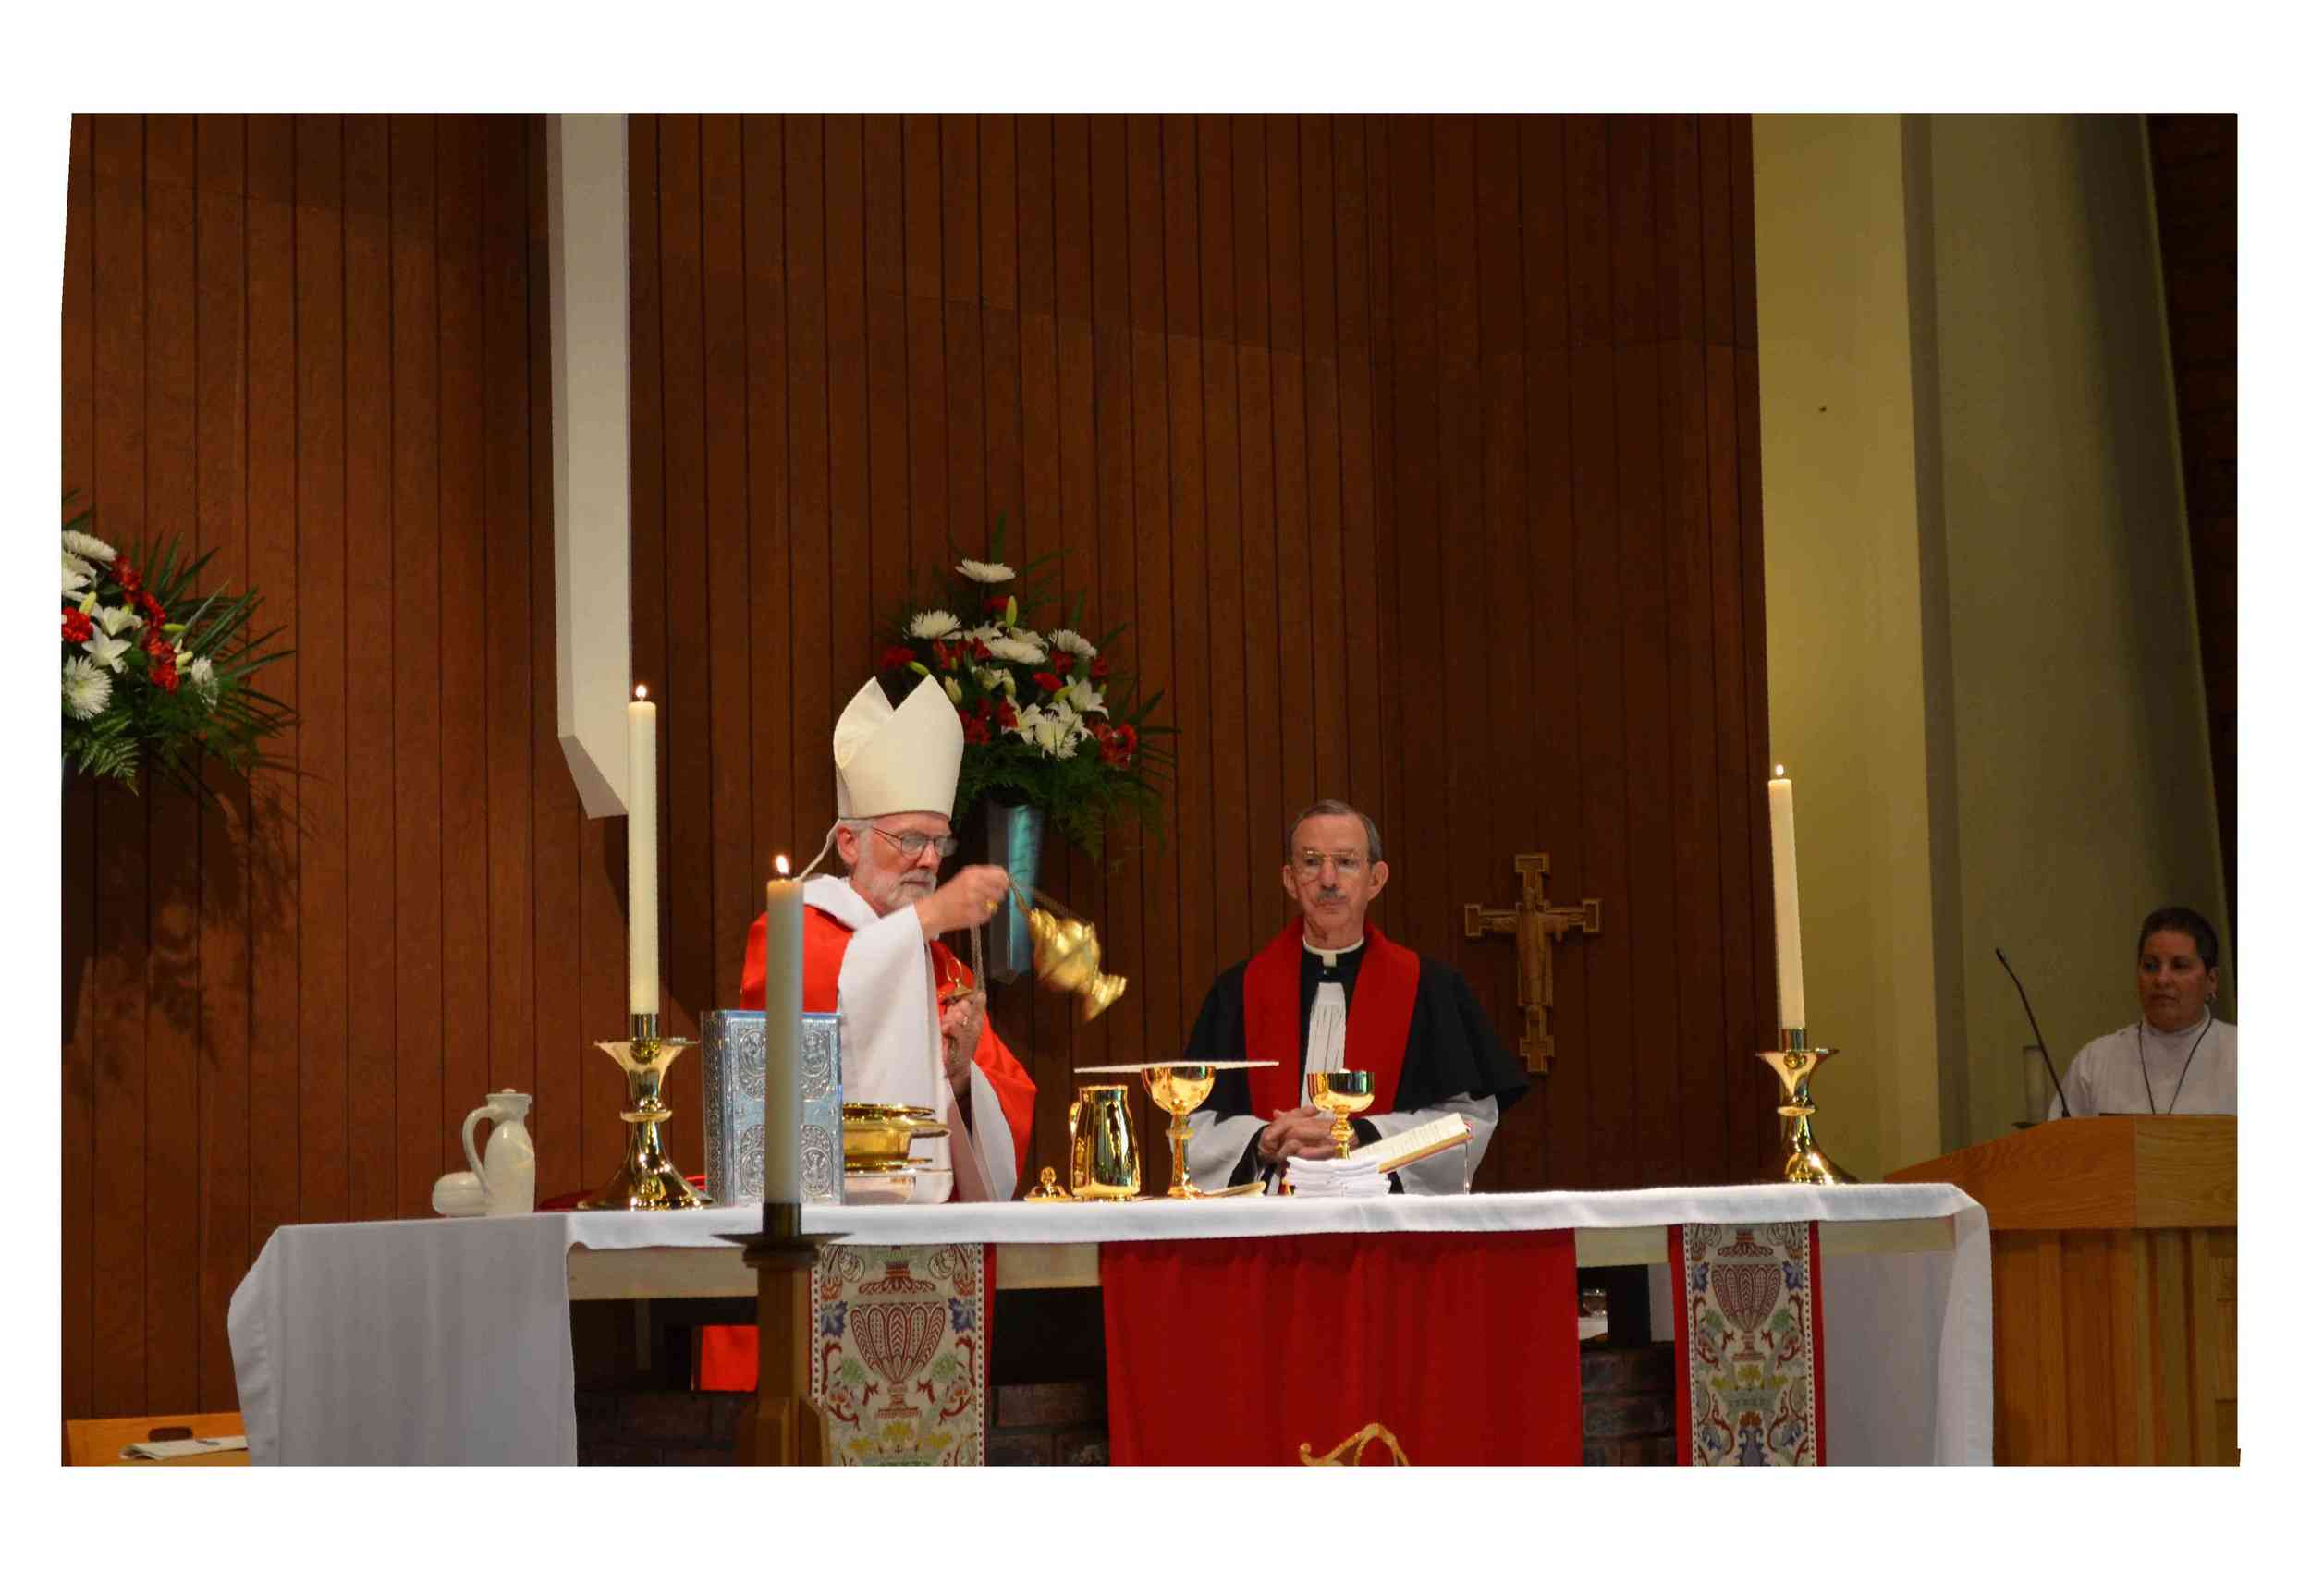  Dedication of candle holders and purificators for the main altar 